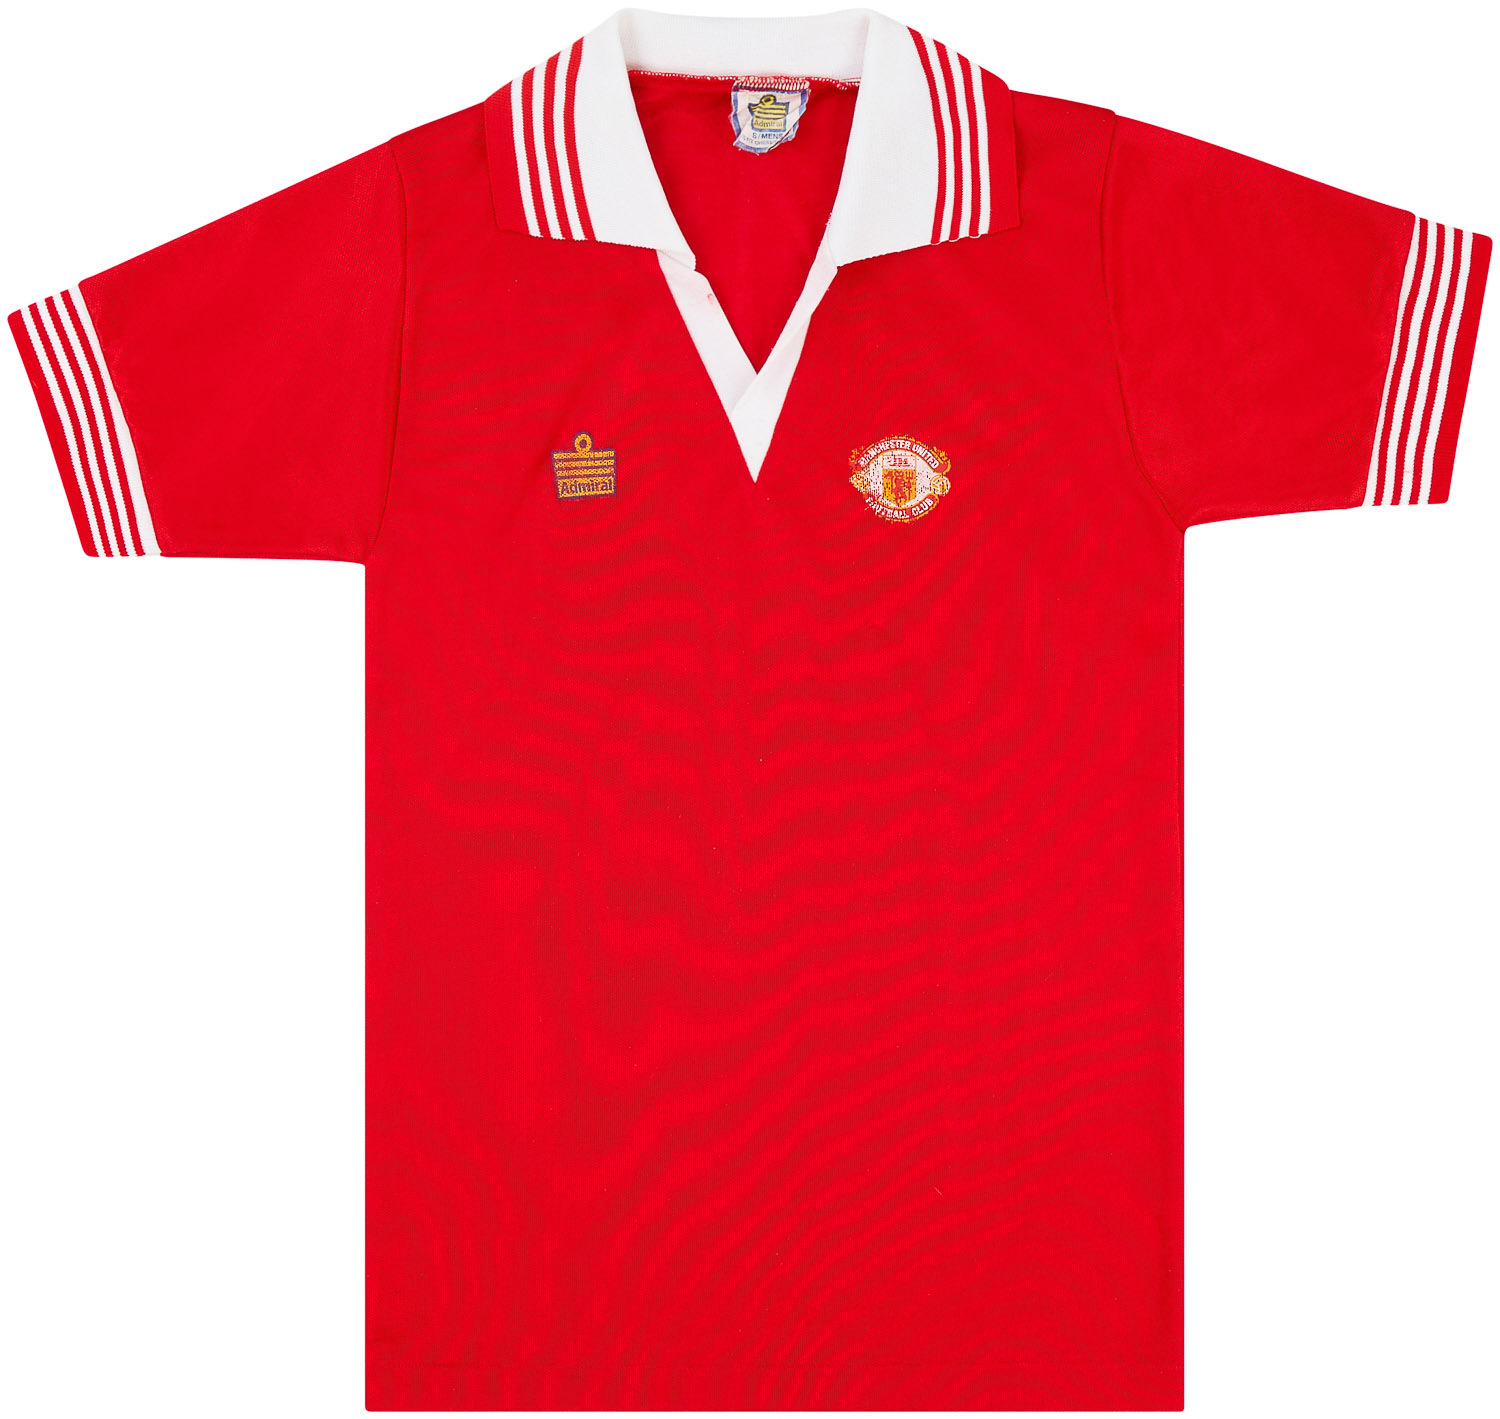 1975-80 Manchester United Home Shirt